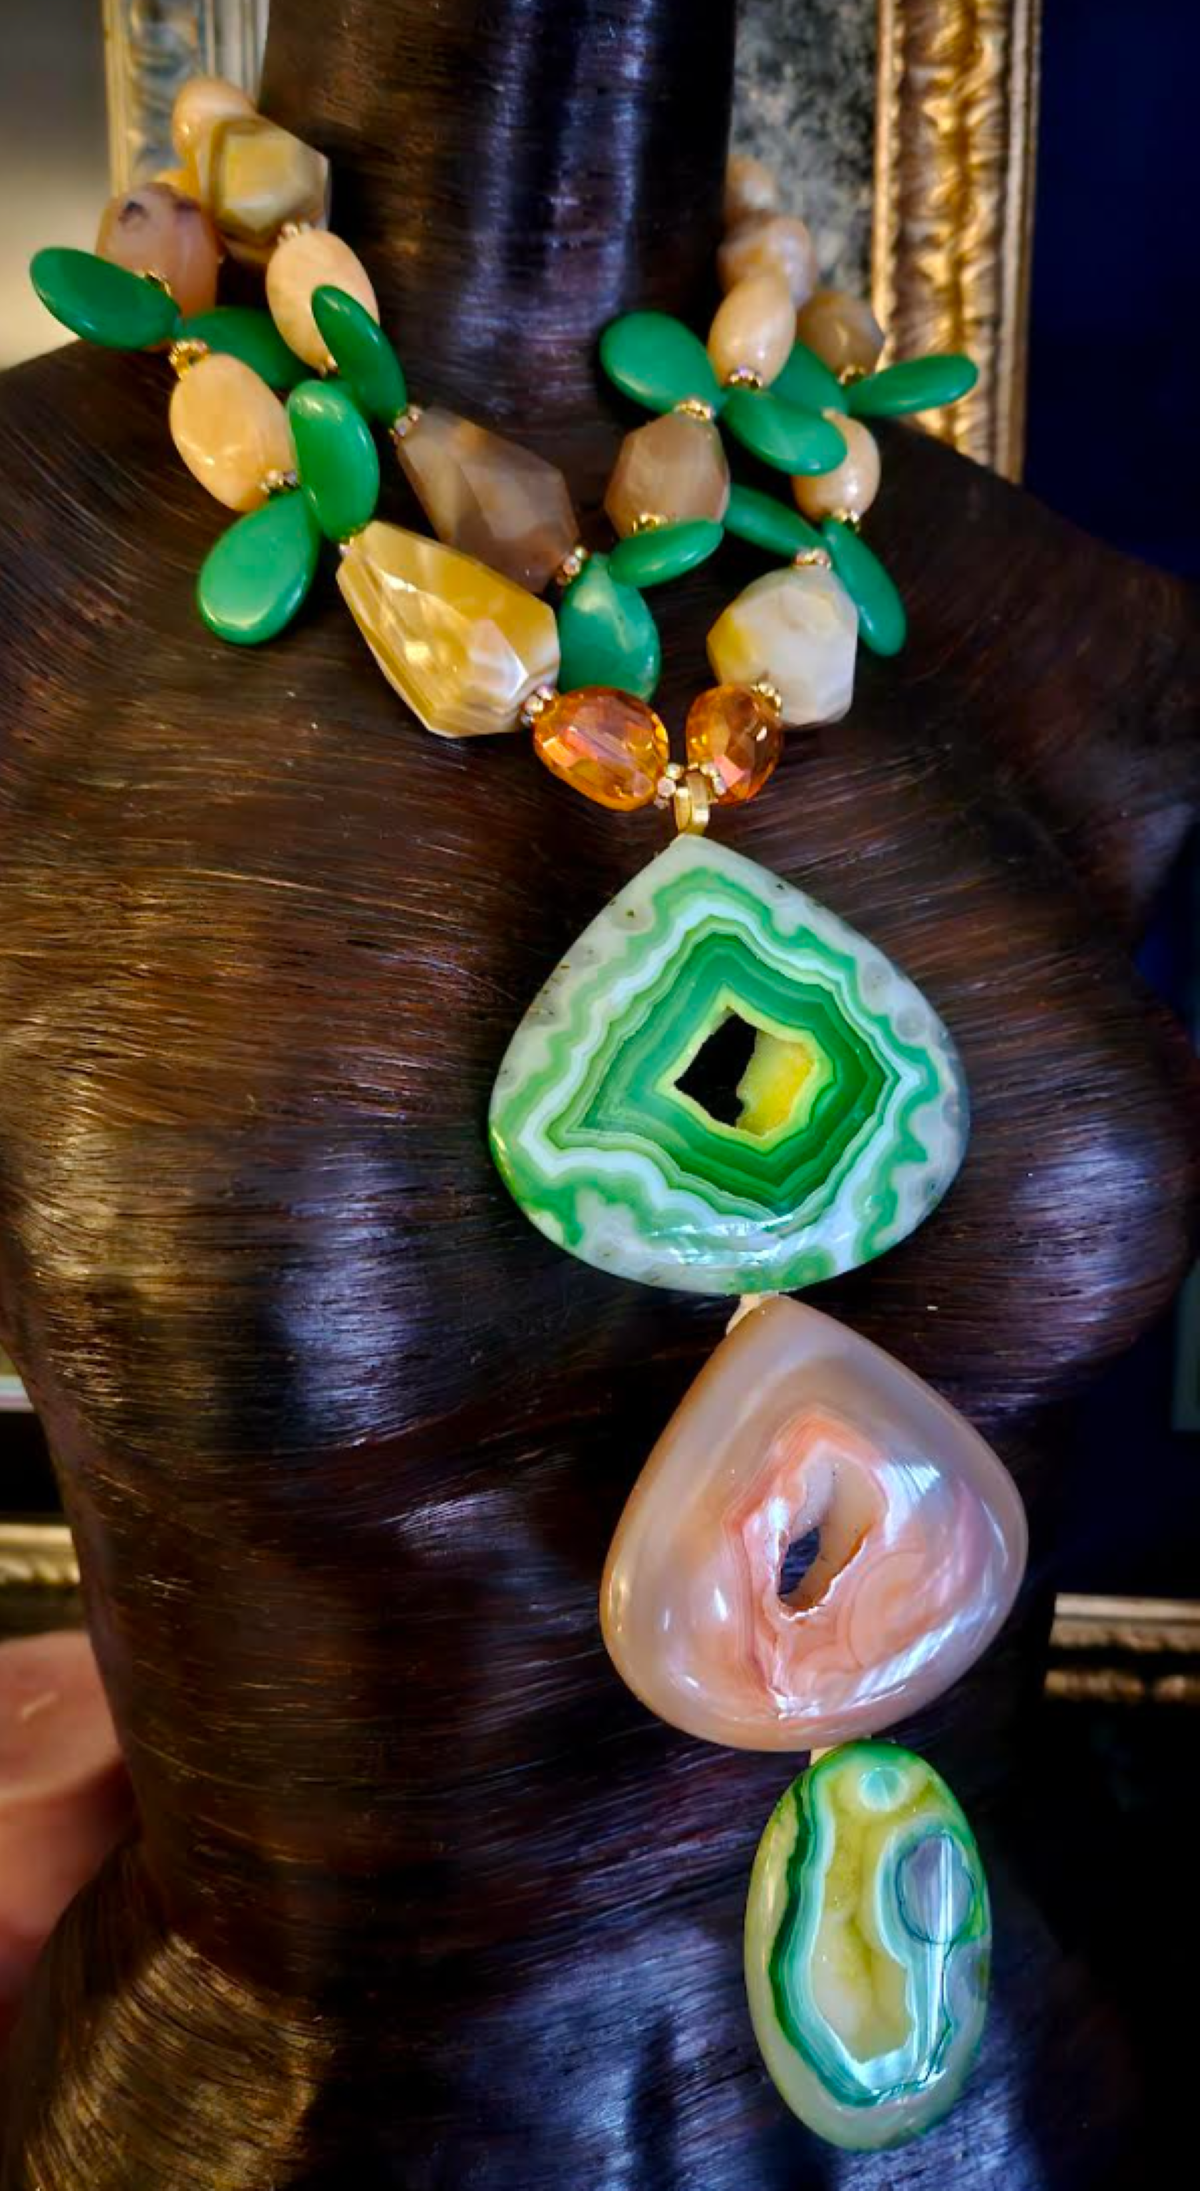 Green & Yellow Druzy Agate Totem on an Agate and Quartz Statement Necklace, OOAK Art to Wear Jewelry, Haute Couture Photoshoot Chest Piece